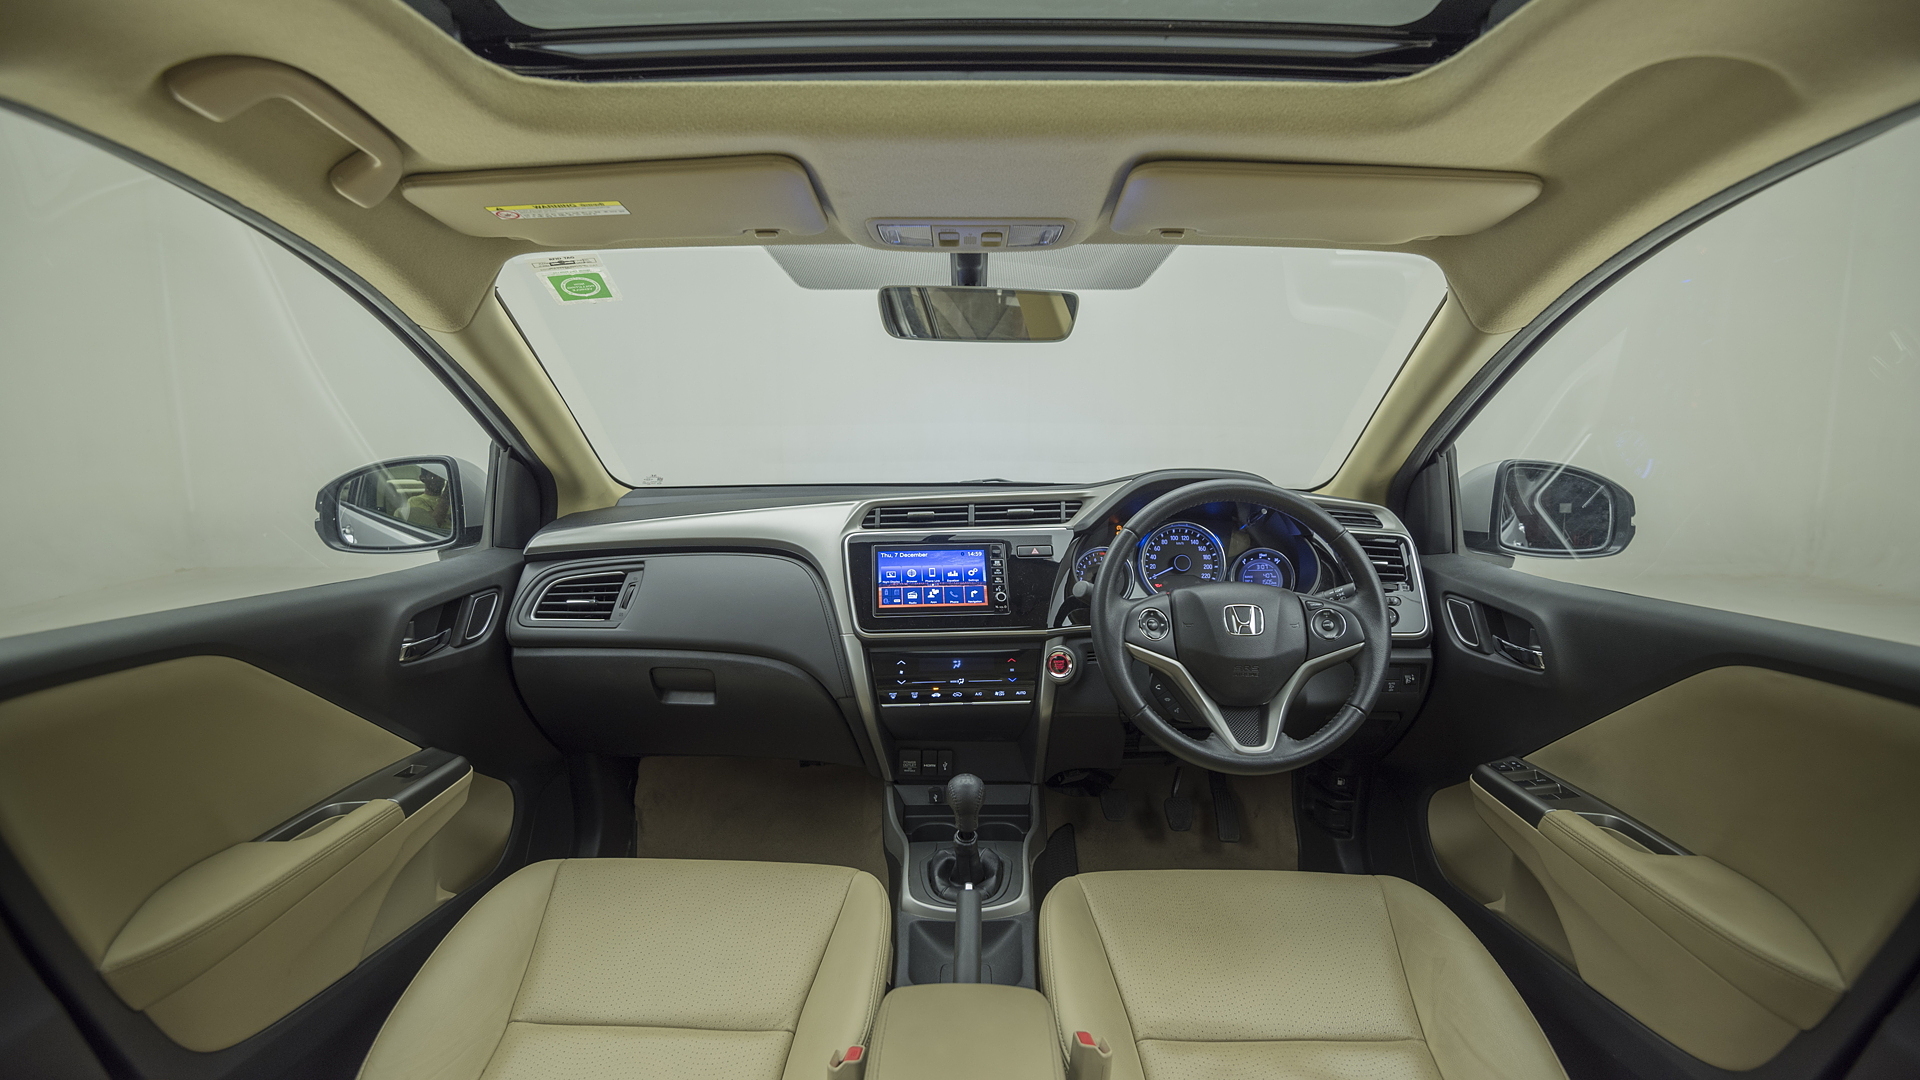 Honda City Images Interior Exterior Photo Gallery Carwale